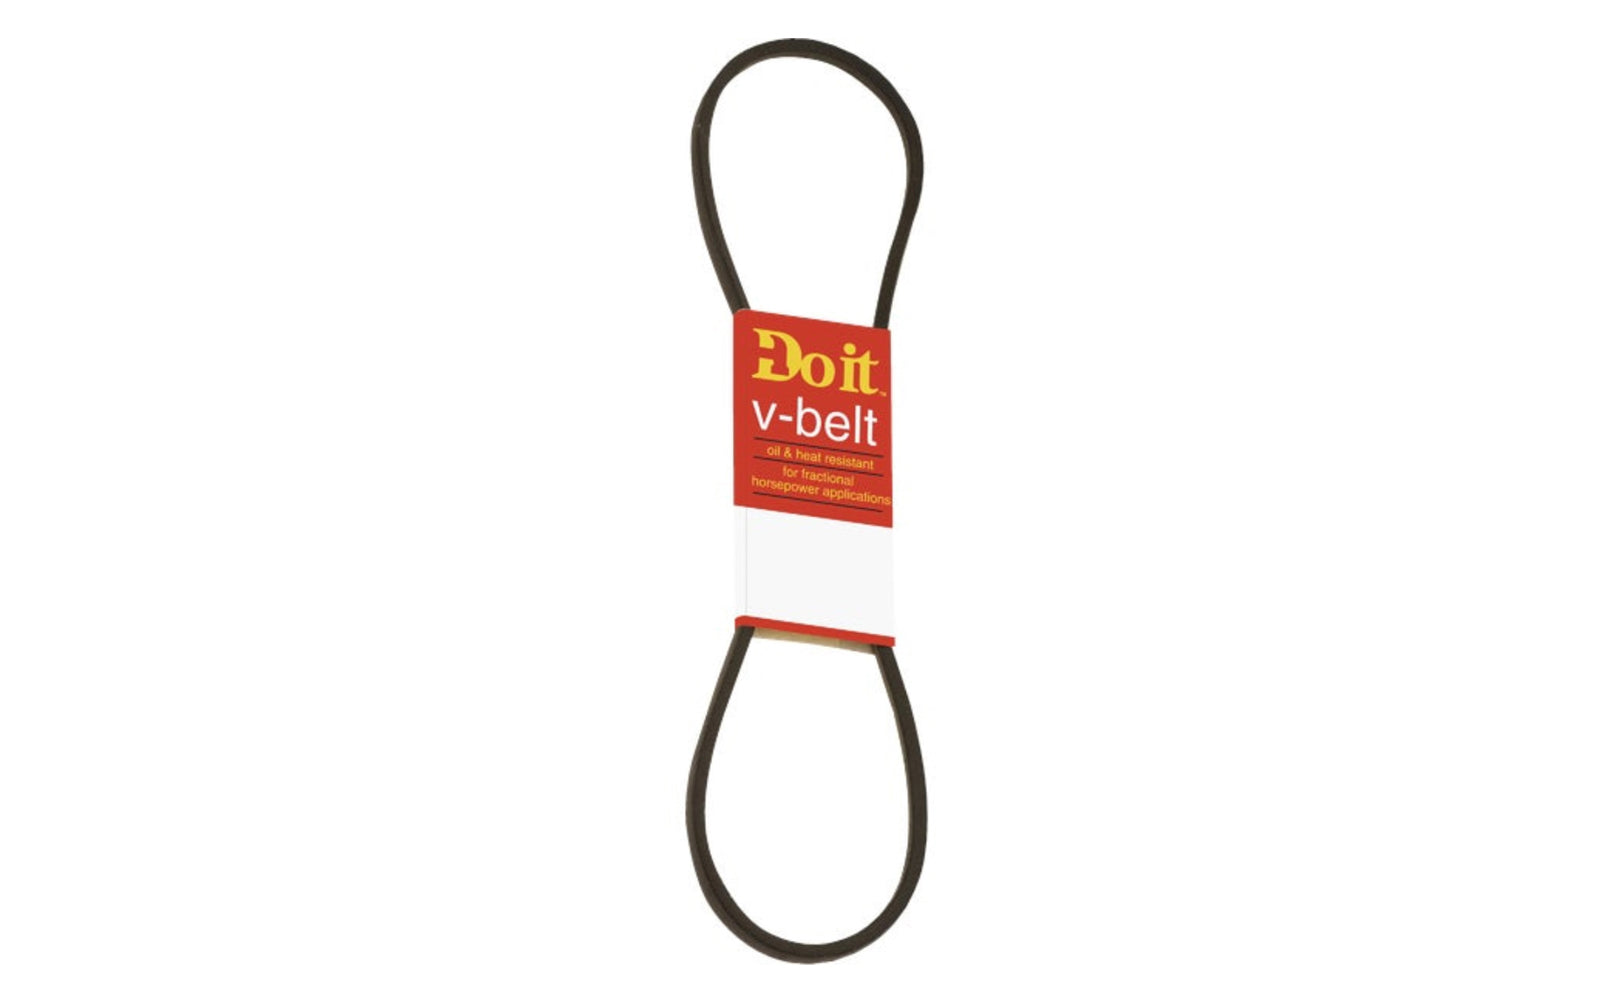 37" Long x 1/2" Width V-Belt - 4L370. Rubber V-Belt. Oil & heat resistant. Recommended for 1-3 HP (horsepower) light-duty applications. Typically the best option for electric powered applications. For refrigerators, washing machines, pumps, stokers, woodworking machines. Pulley type: A-Pulley.